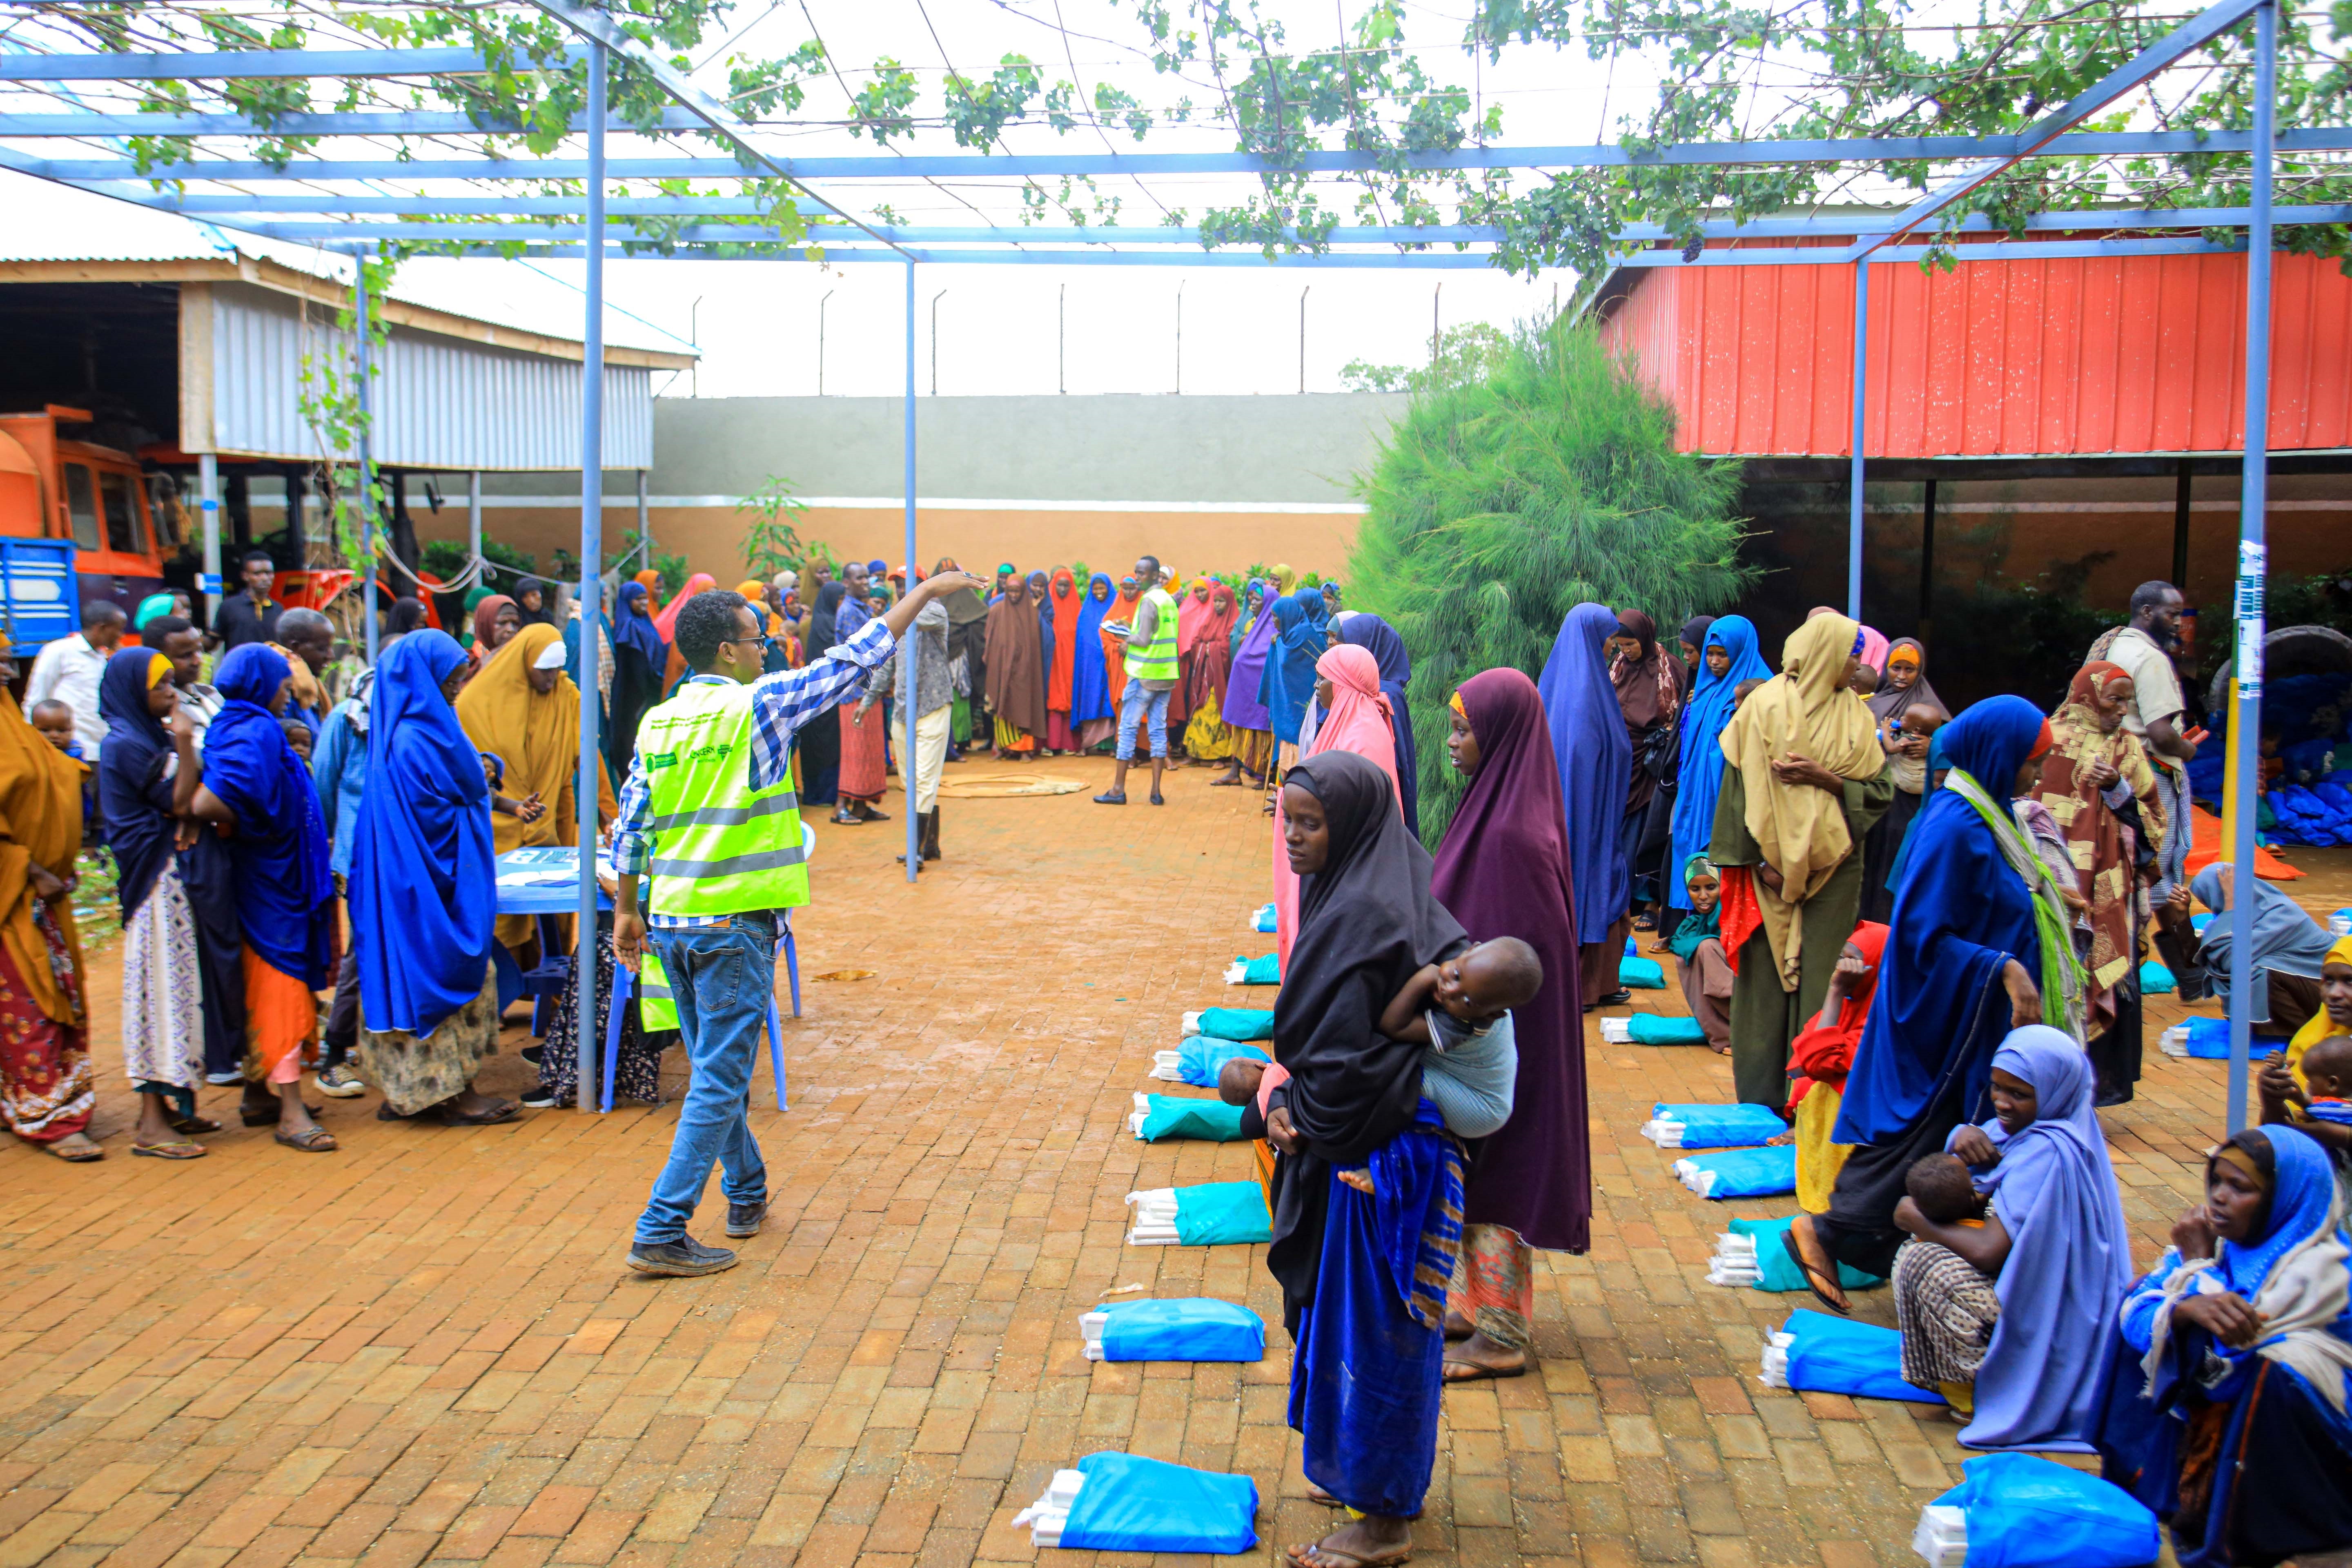 Concern team distributing hygiene kits and non-food items to participating households in Somalia